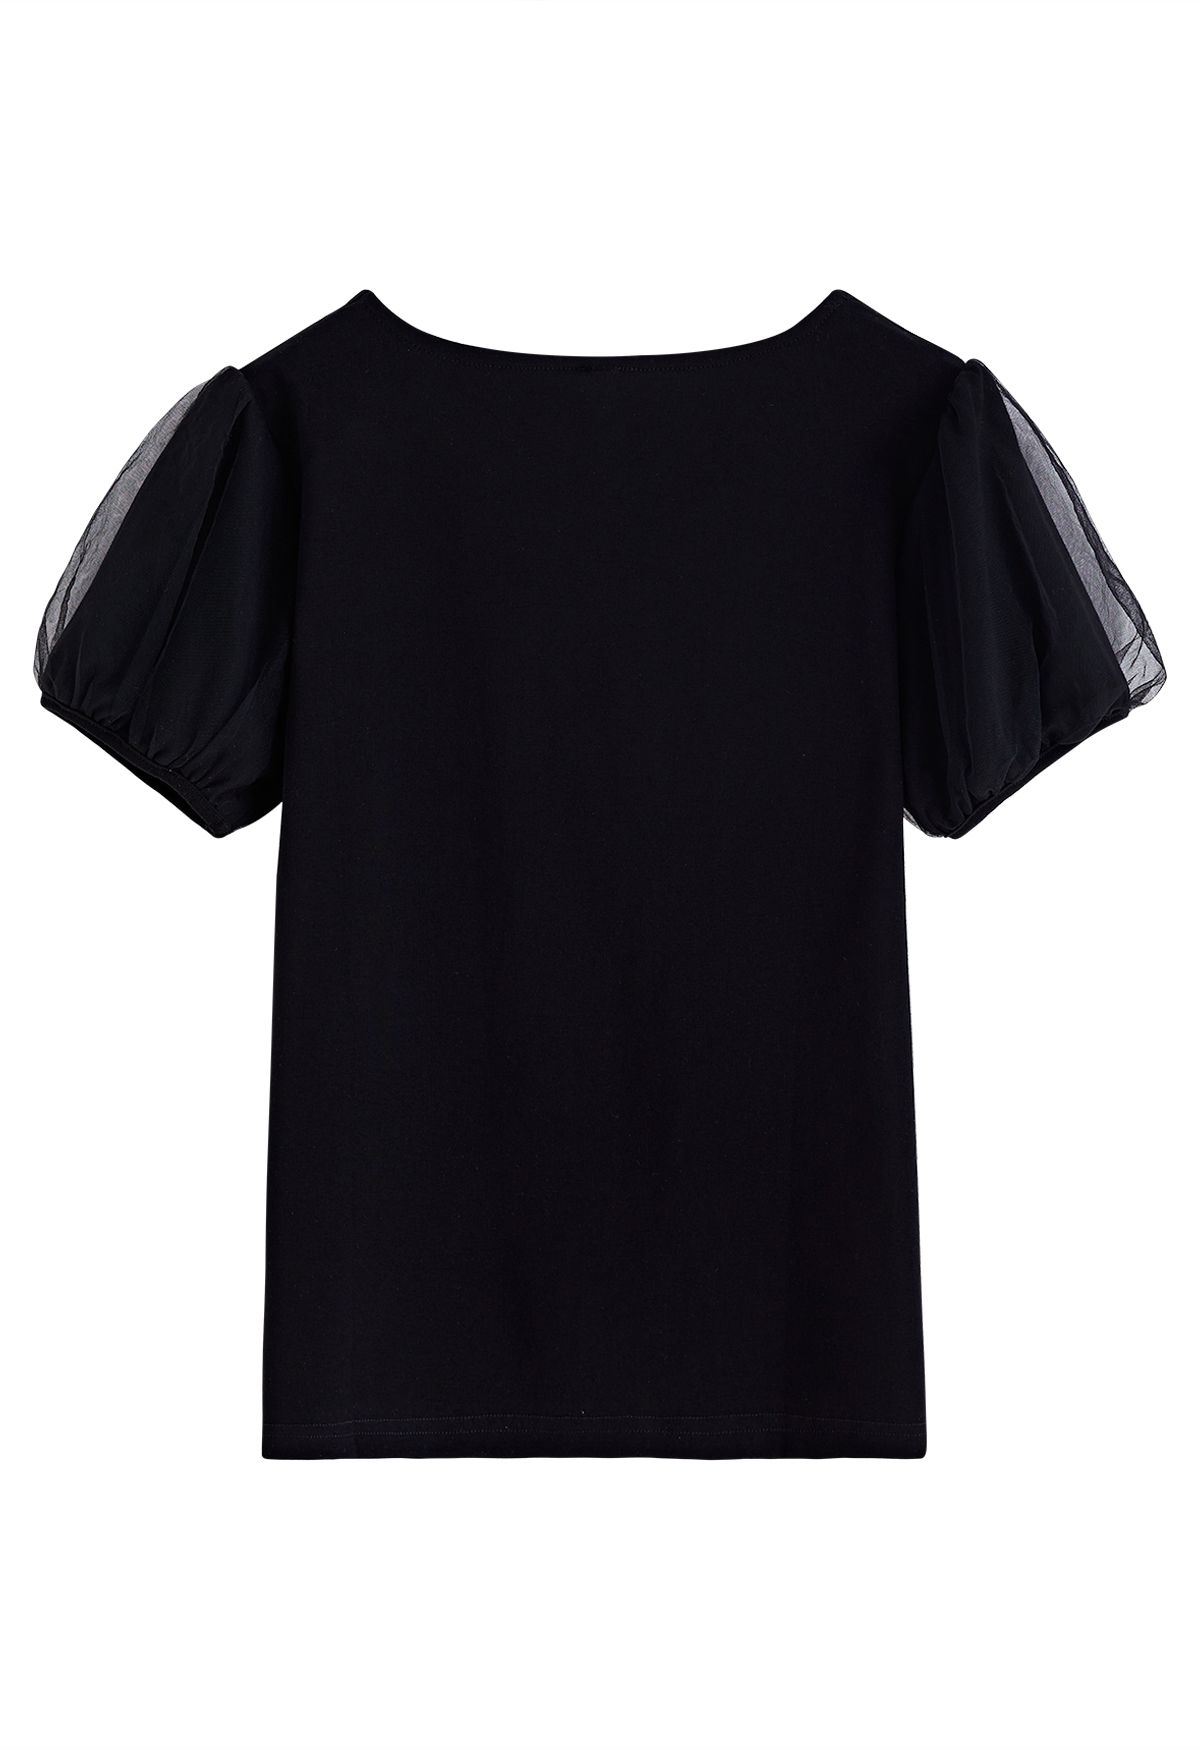 Square Neck Mesh Bubble Sleeves Top in Black - Retro, Indie and Unique ...